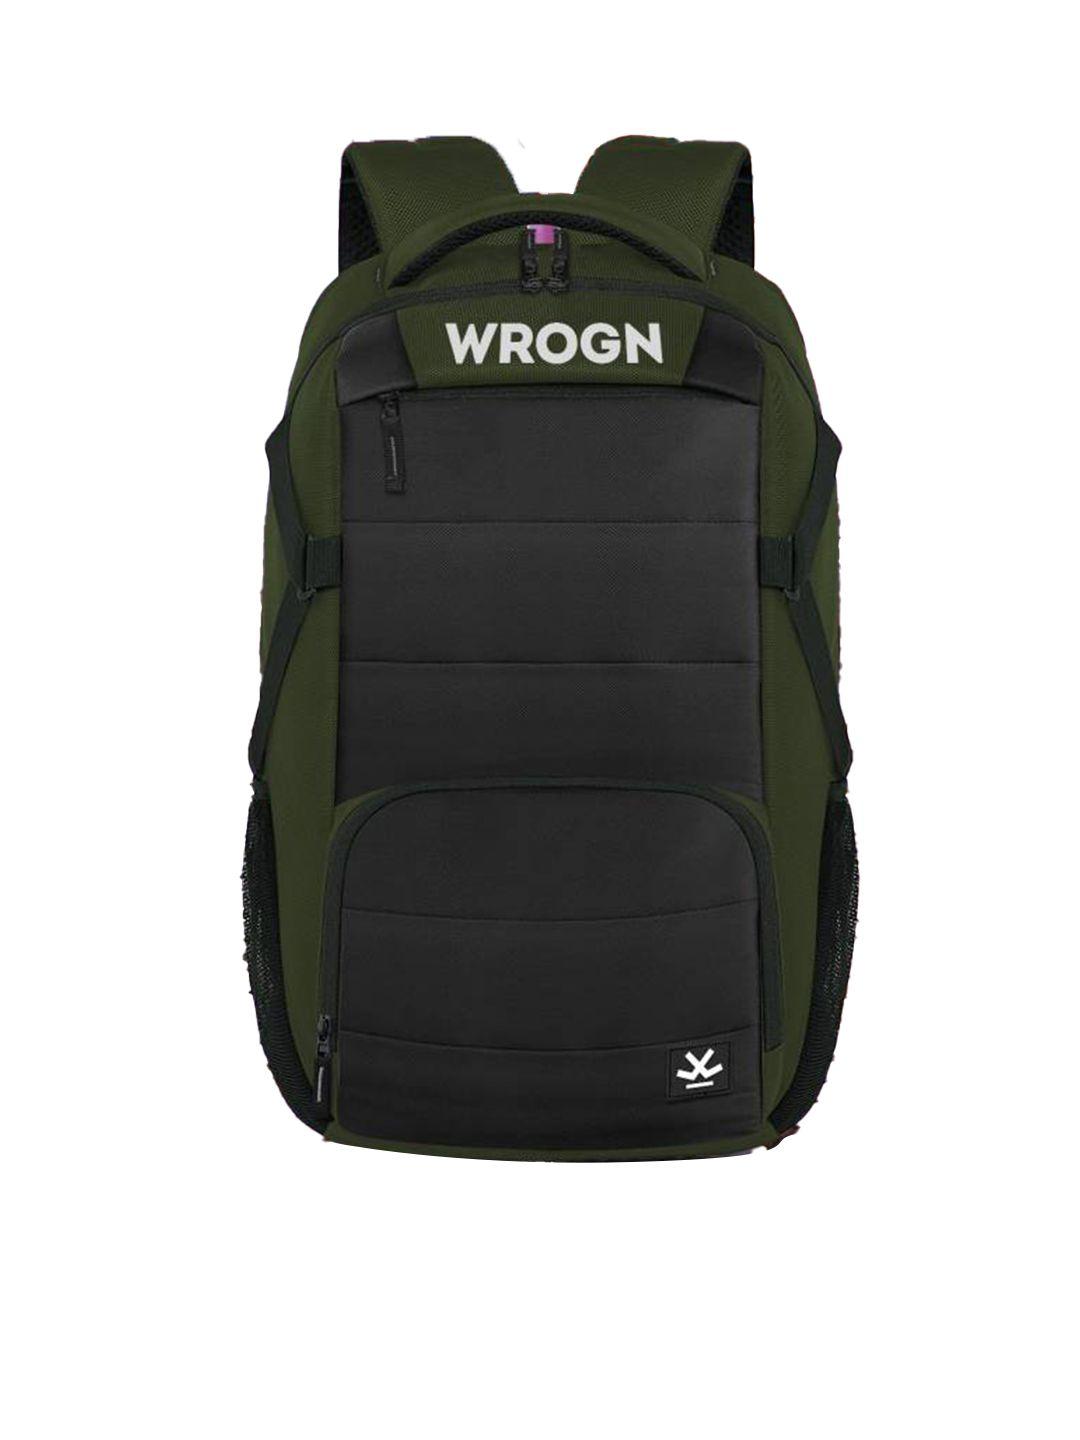 wrogn backpack with reflective strip